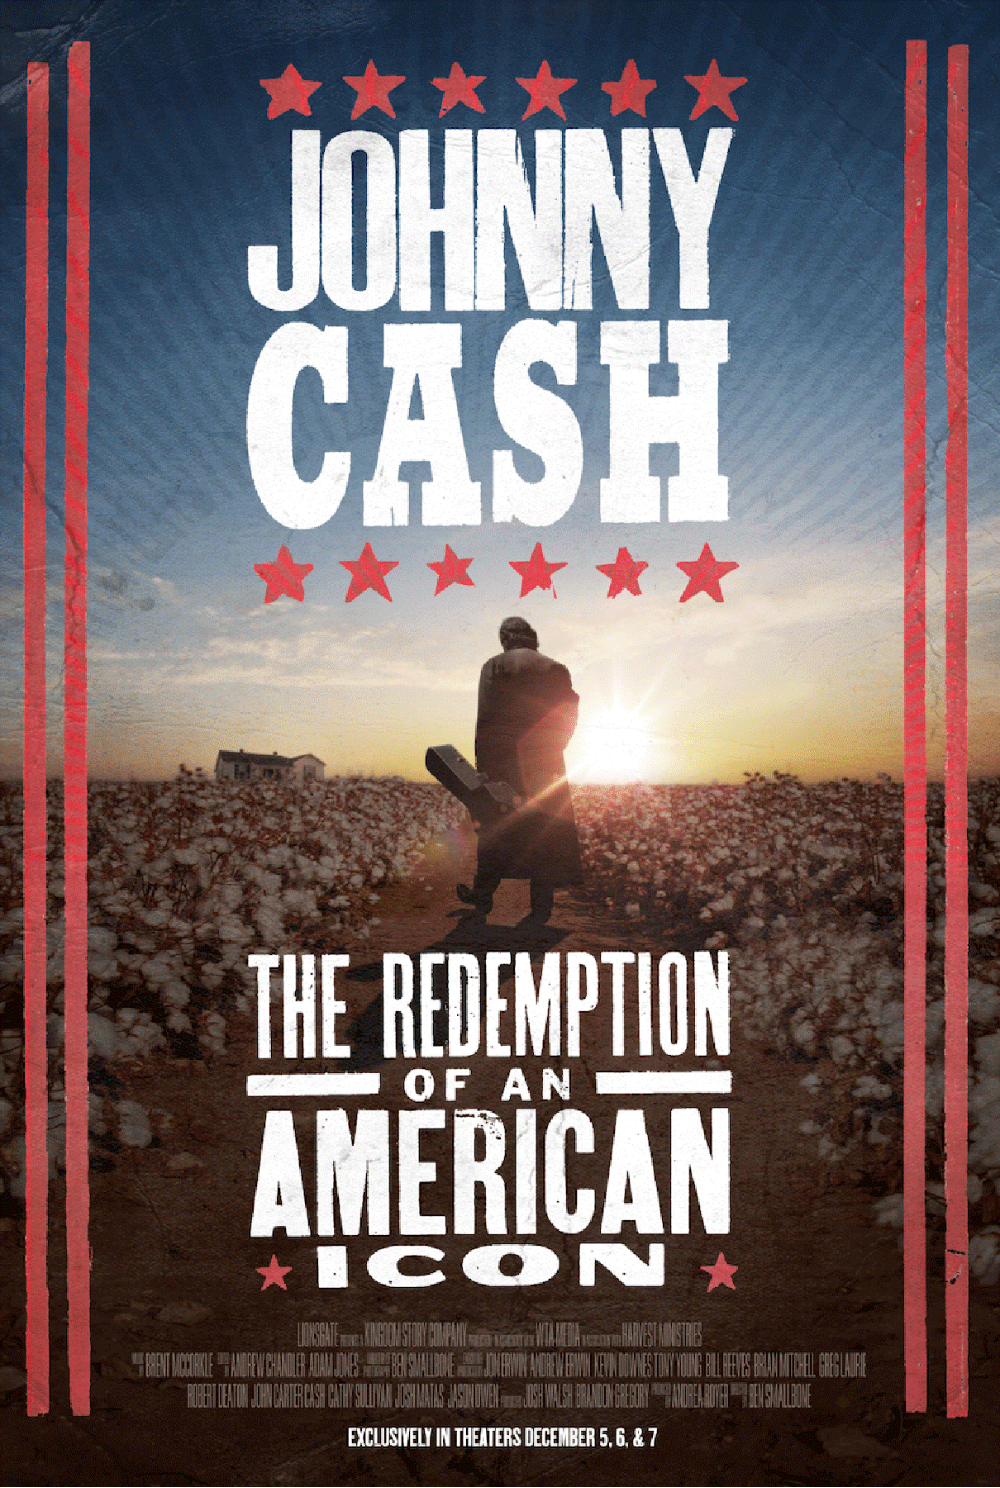 Special Screening of Johnny Cash Documentary Scheduled